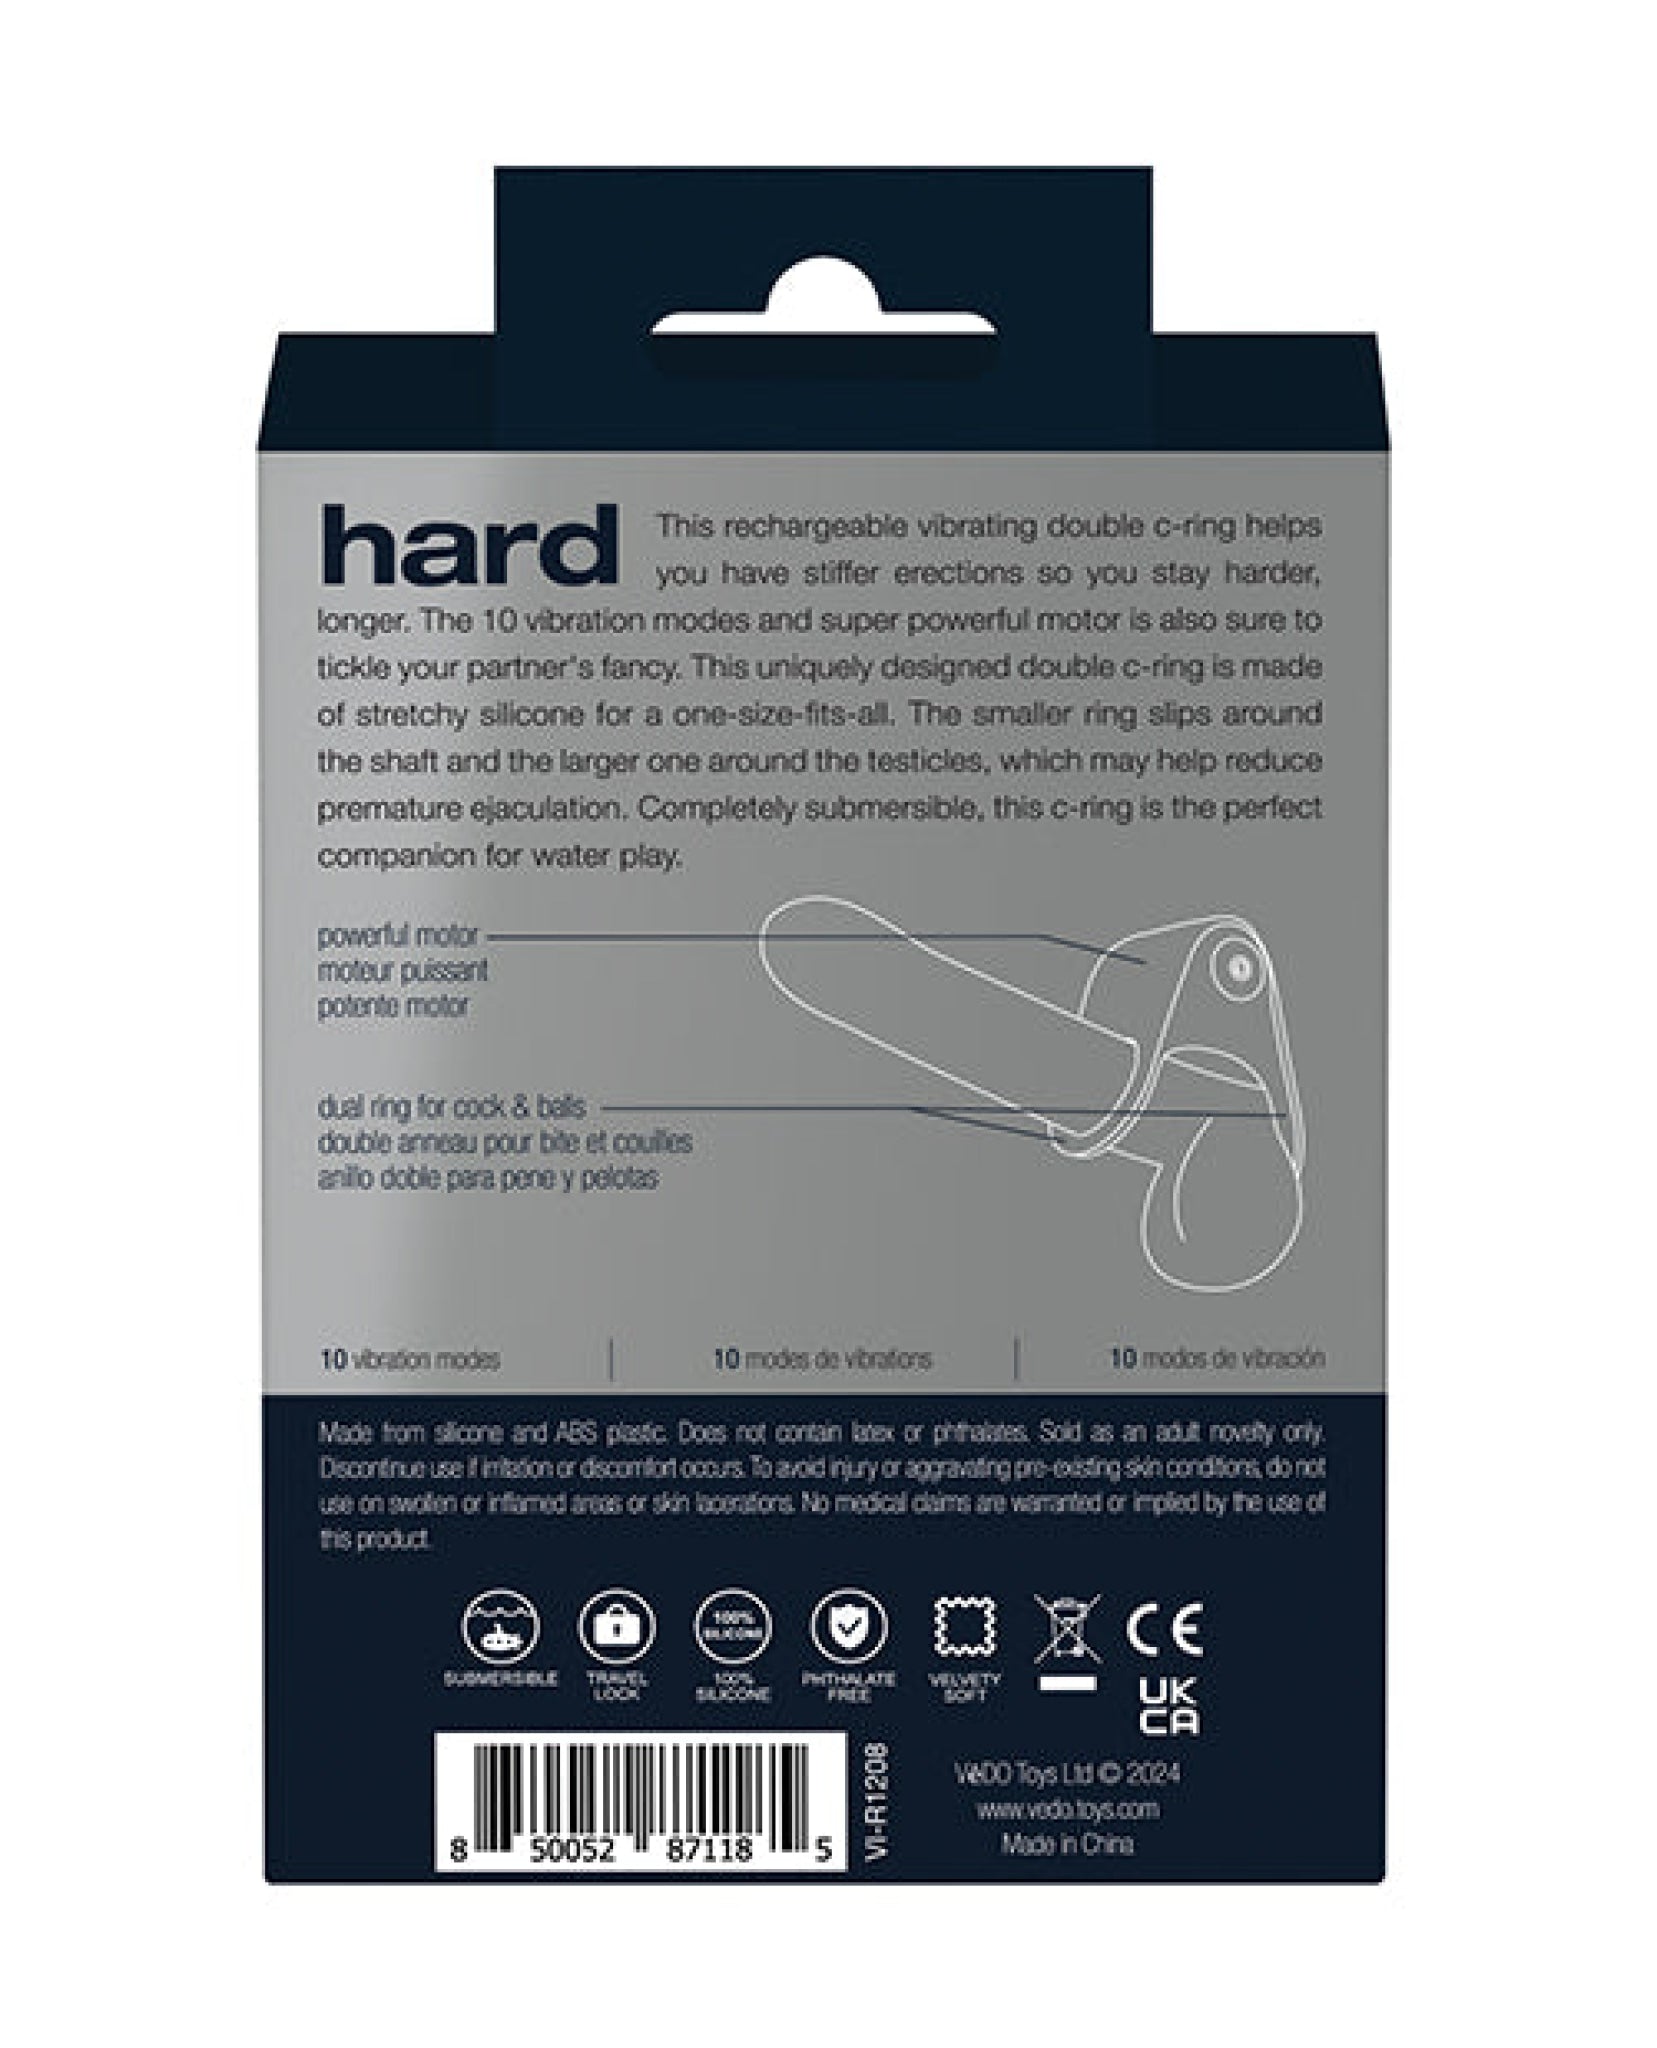 VeDo Hard Rechargeable C-Ring Savvy Co.